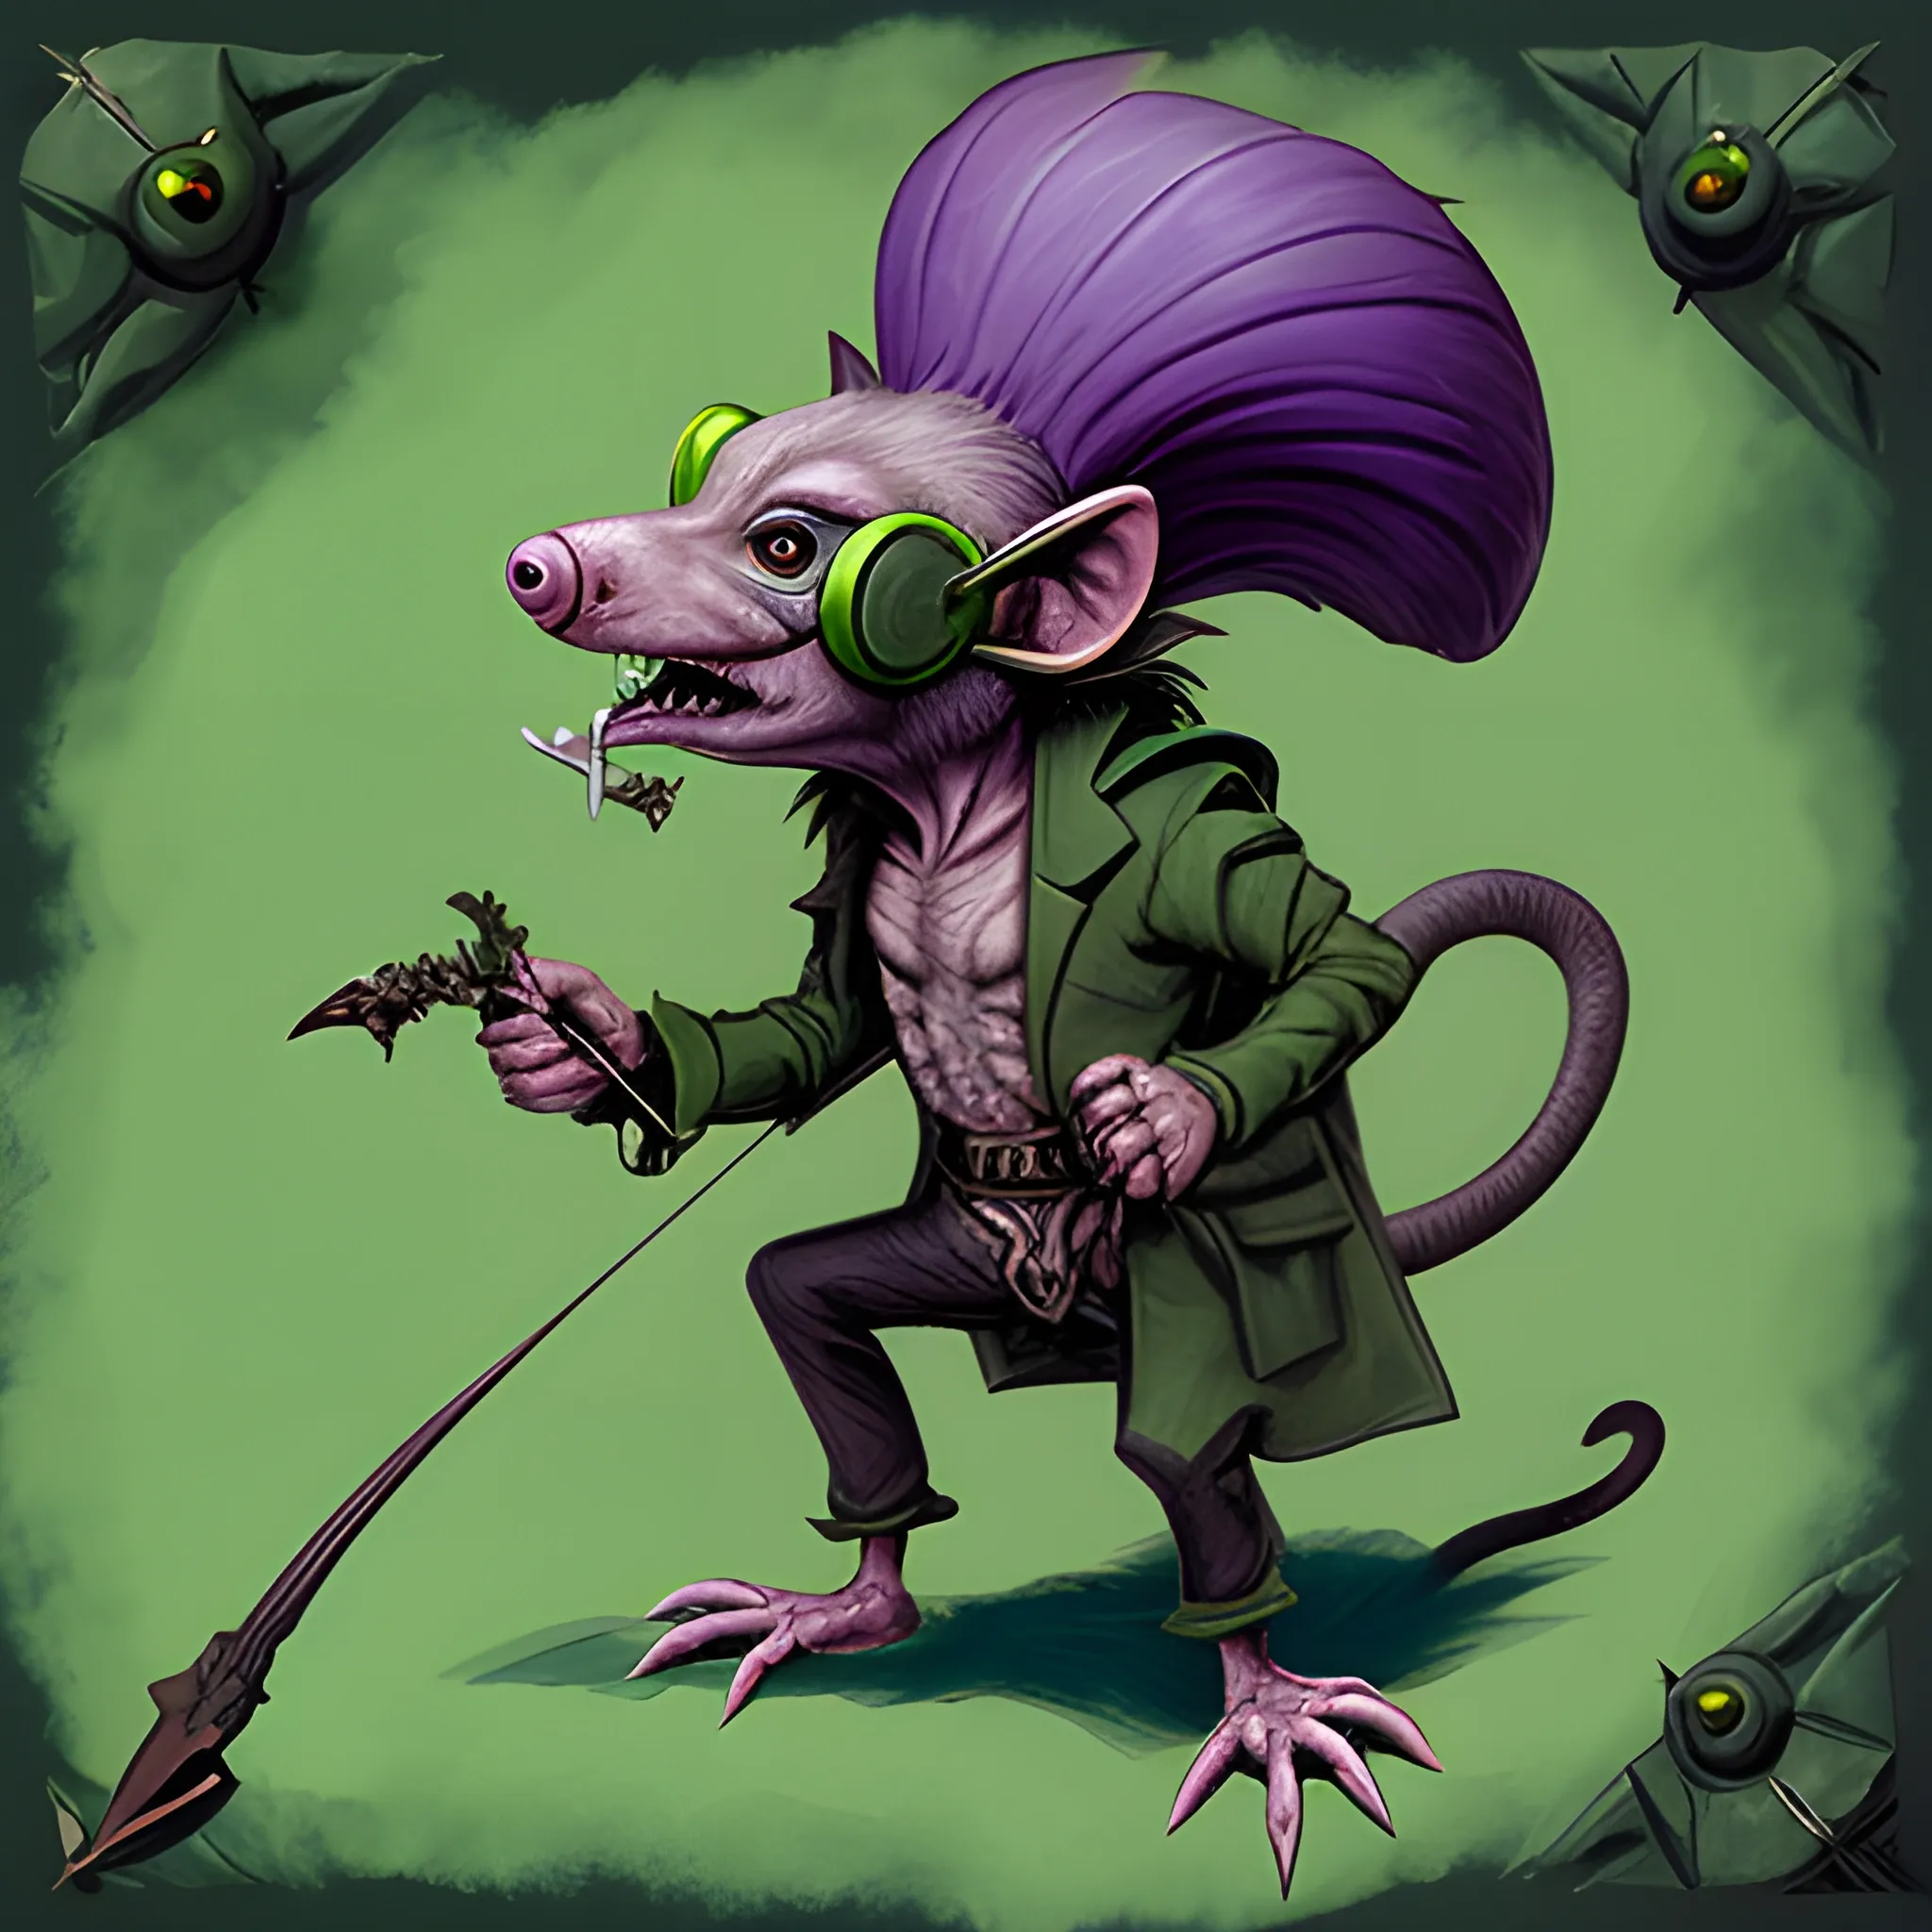 Humanoid Rat Creature, Carries A Poisonous Crossbow, Consumed By A Poison Cloud, Wearing Eye Goggles, And A Green Suit